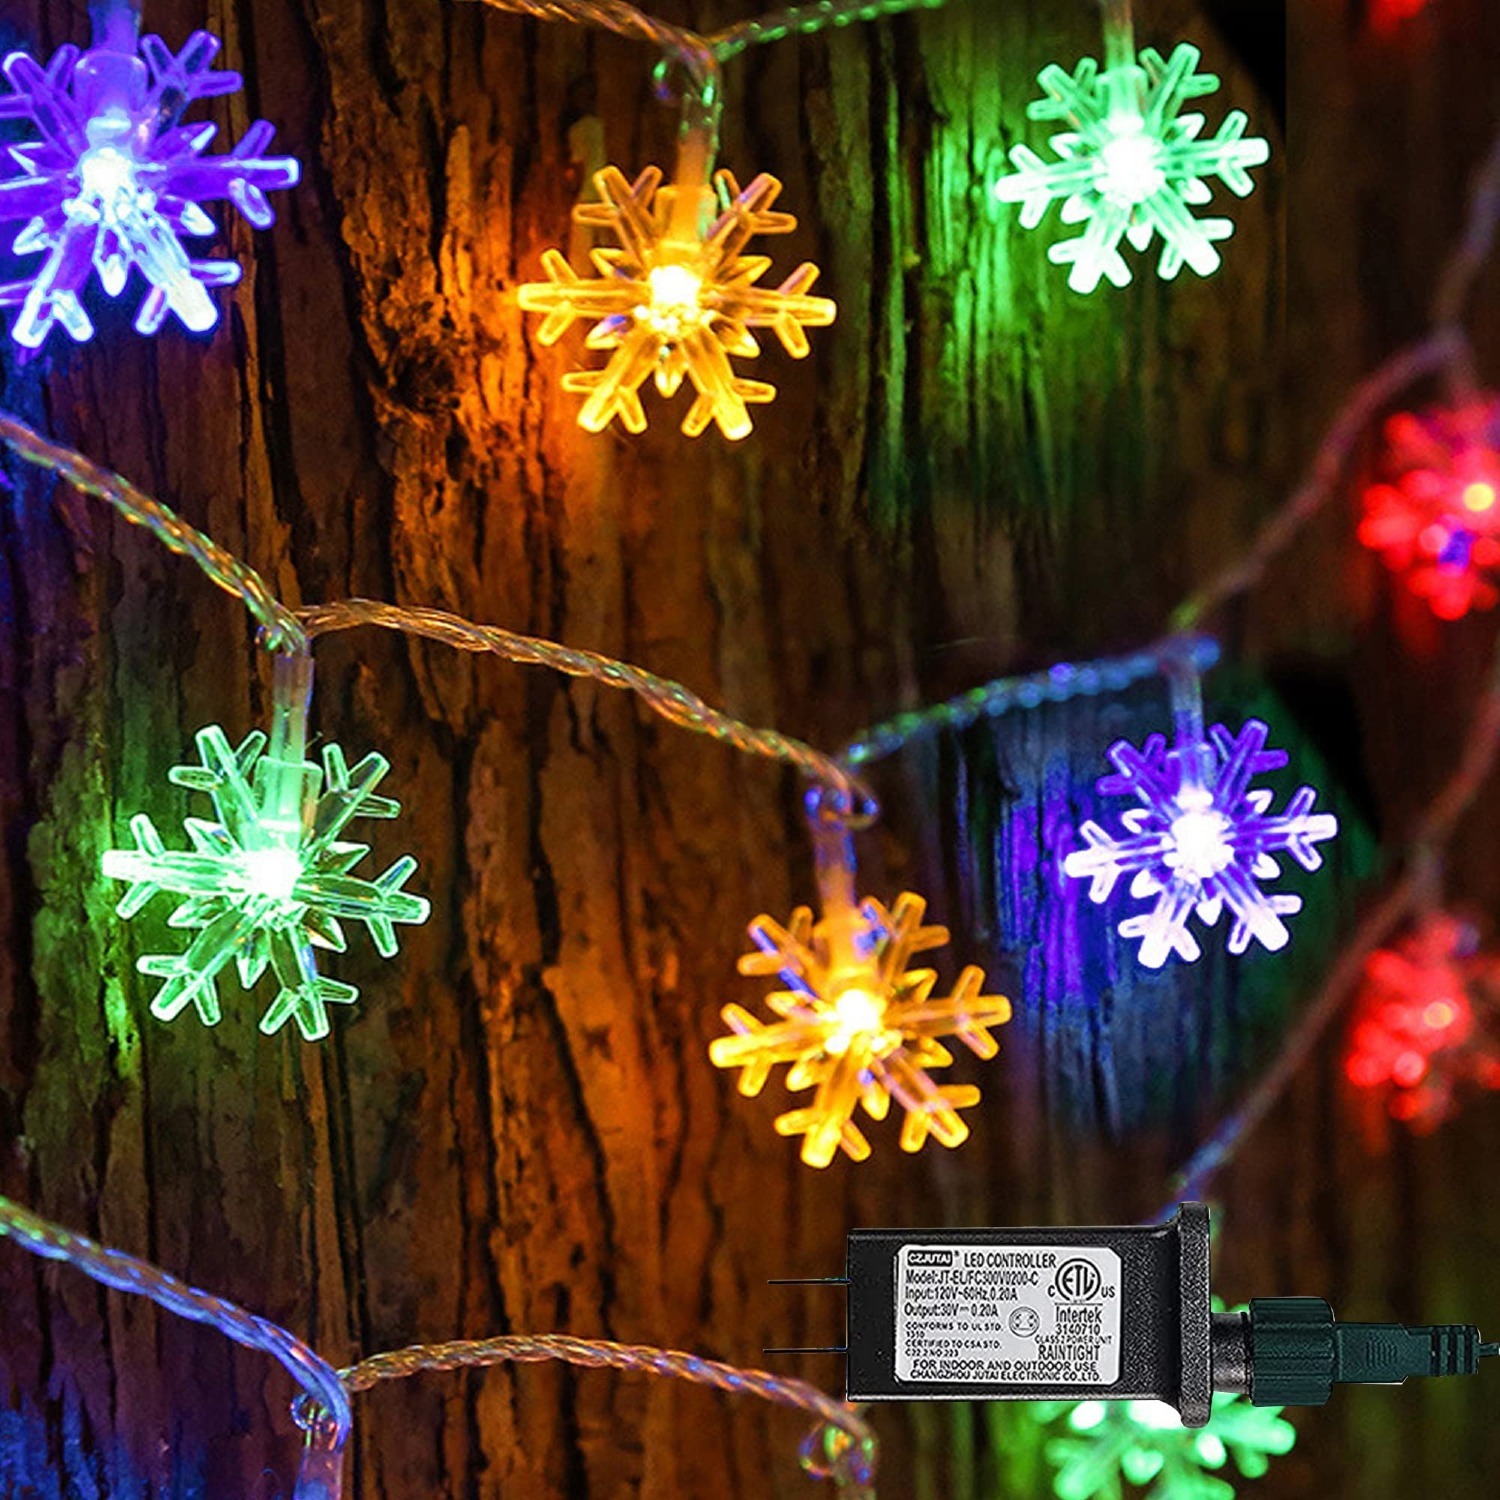 FUNPENY 49 FT 100 LED Christmas Snowflake String Lights $9.60 + Free Shipping w/ Prime or on Orders $25+